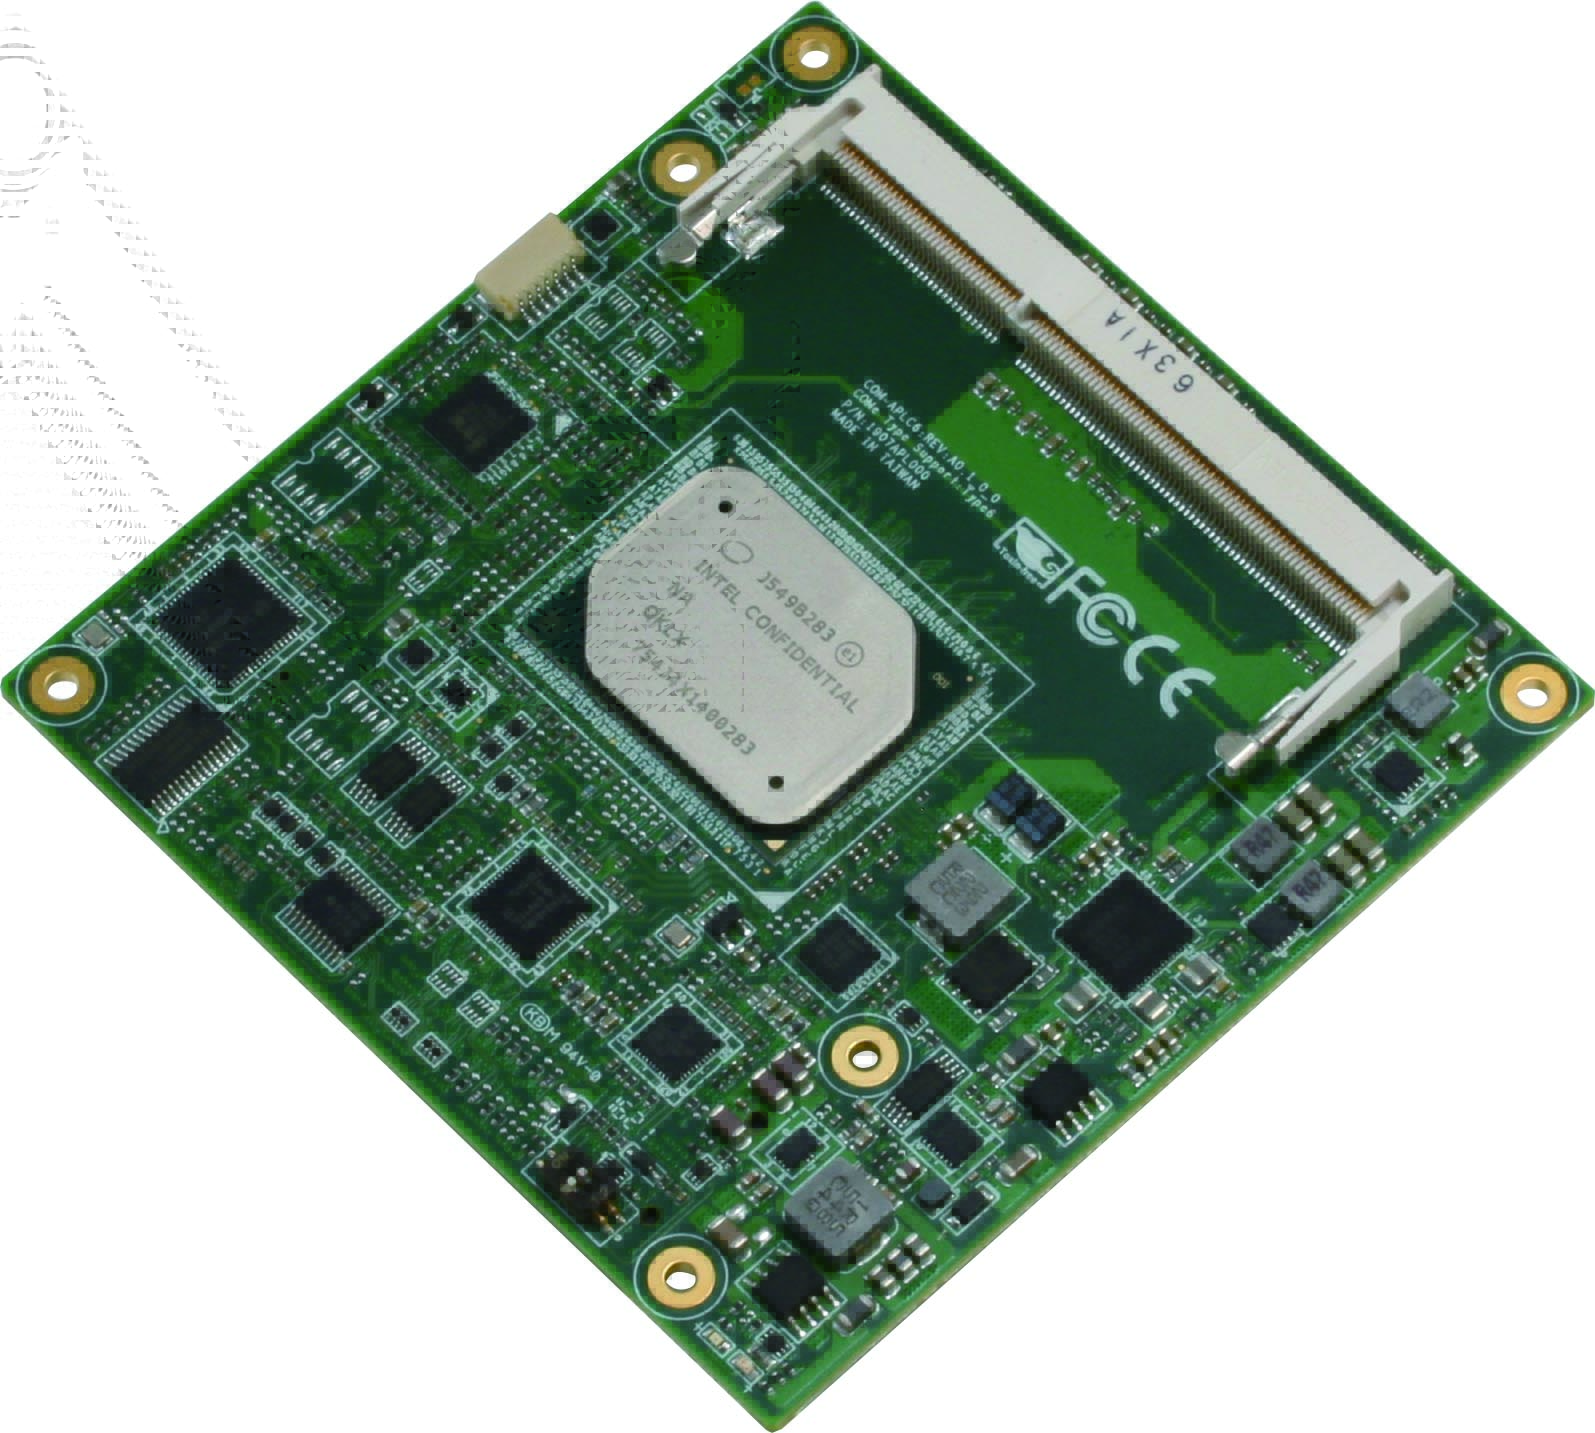 With ECC Memory, the COM-APLC6 can be Relied On to Perform in any Environment